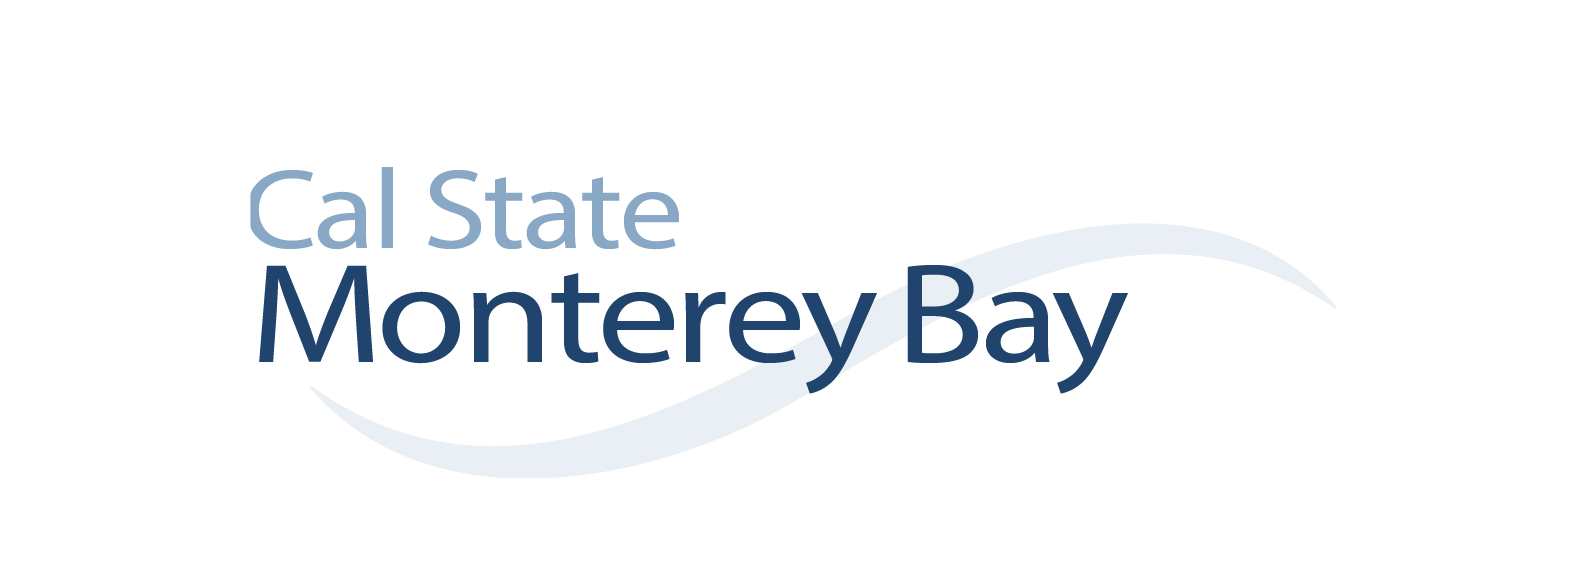 Cal State Monterey Bay Logo in different font style